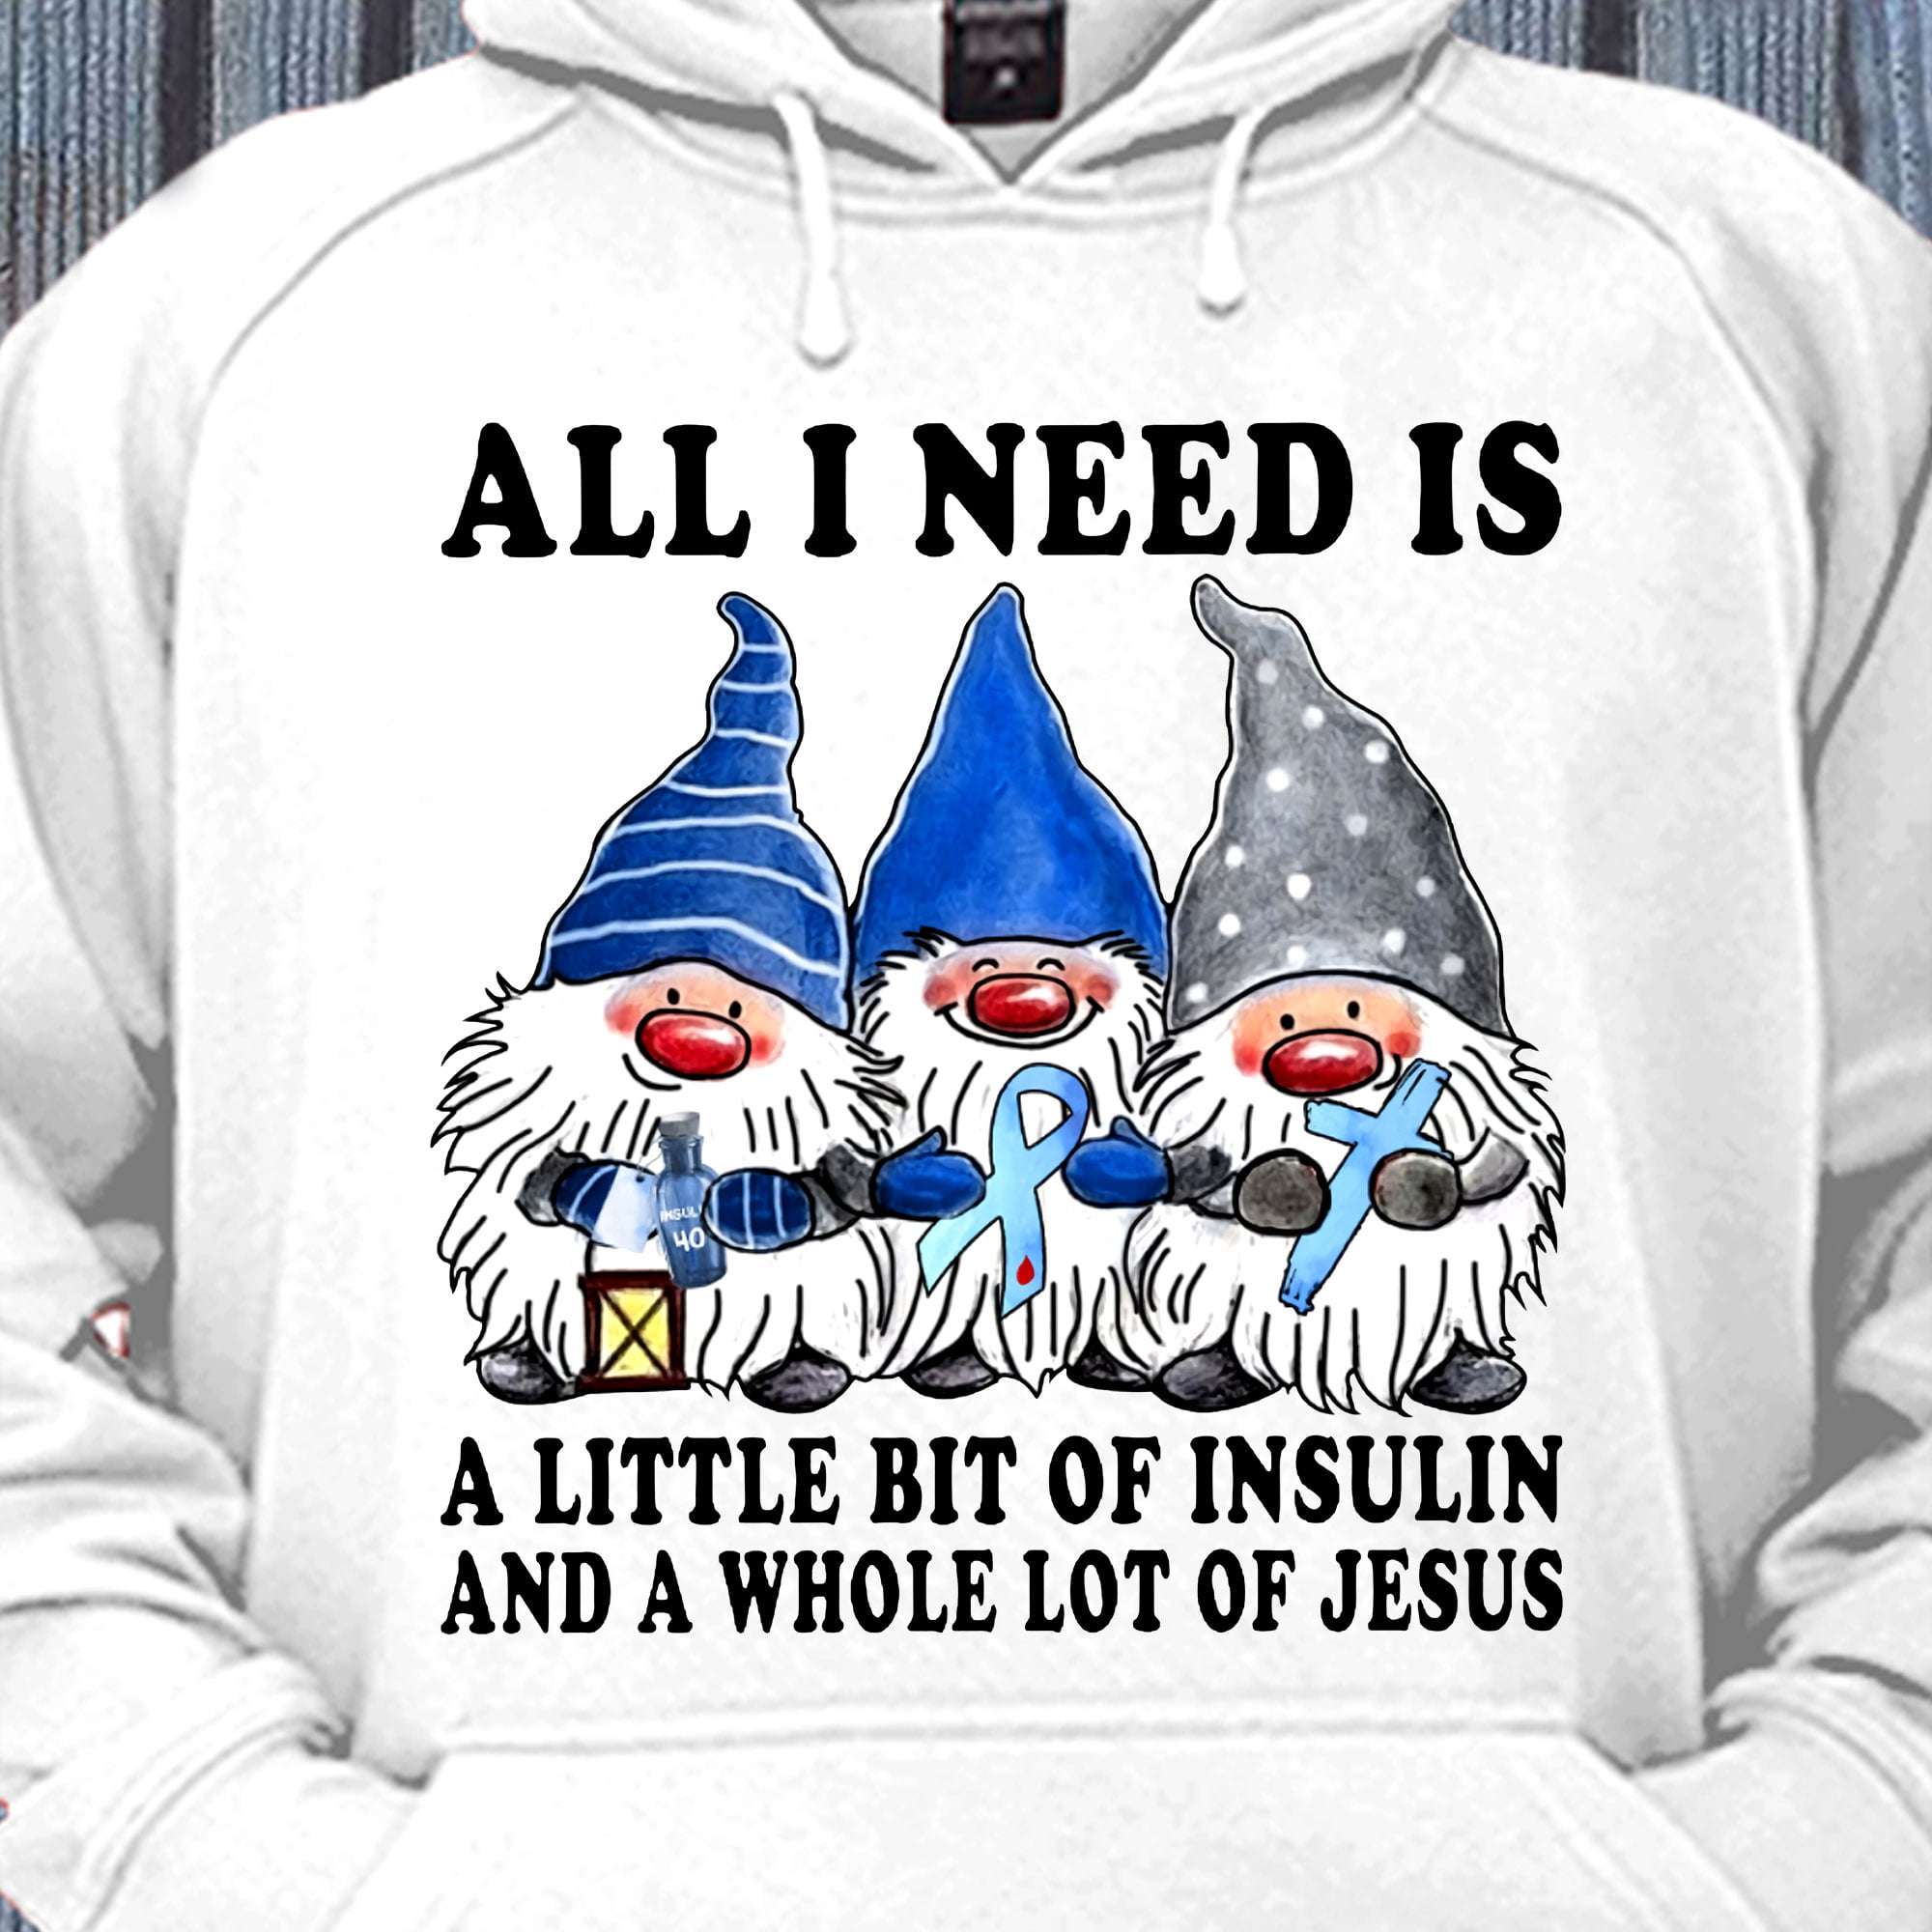 All I need is a little bit of insulin and a whole lot of Jesus - Diabetes awareness